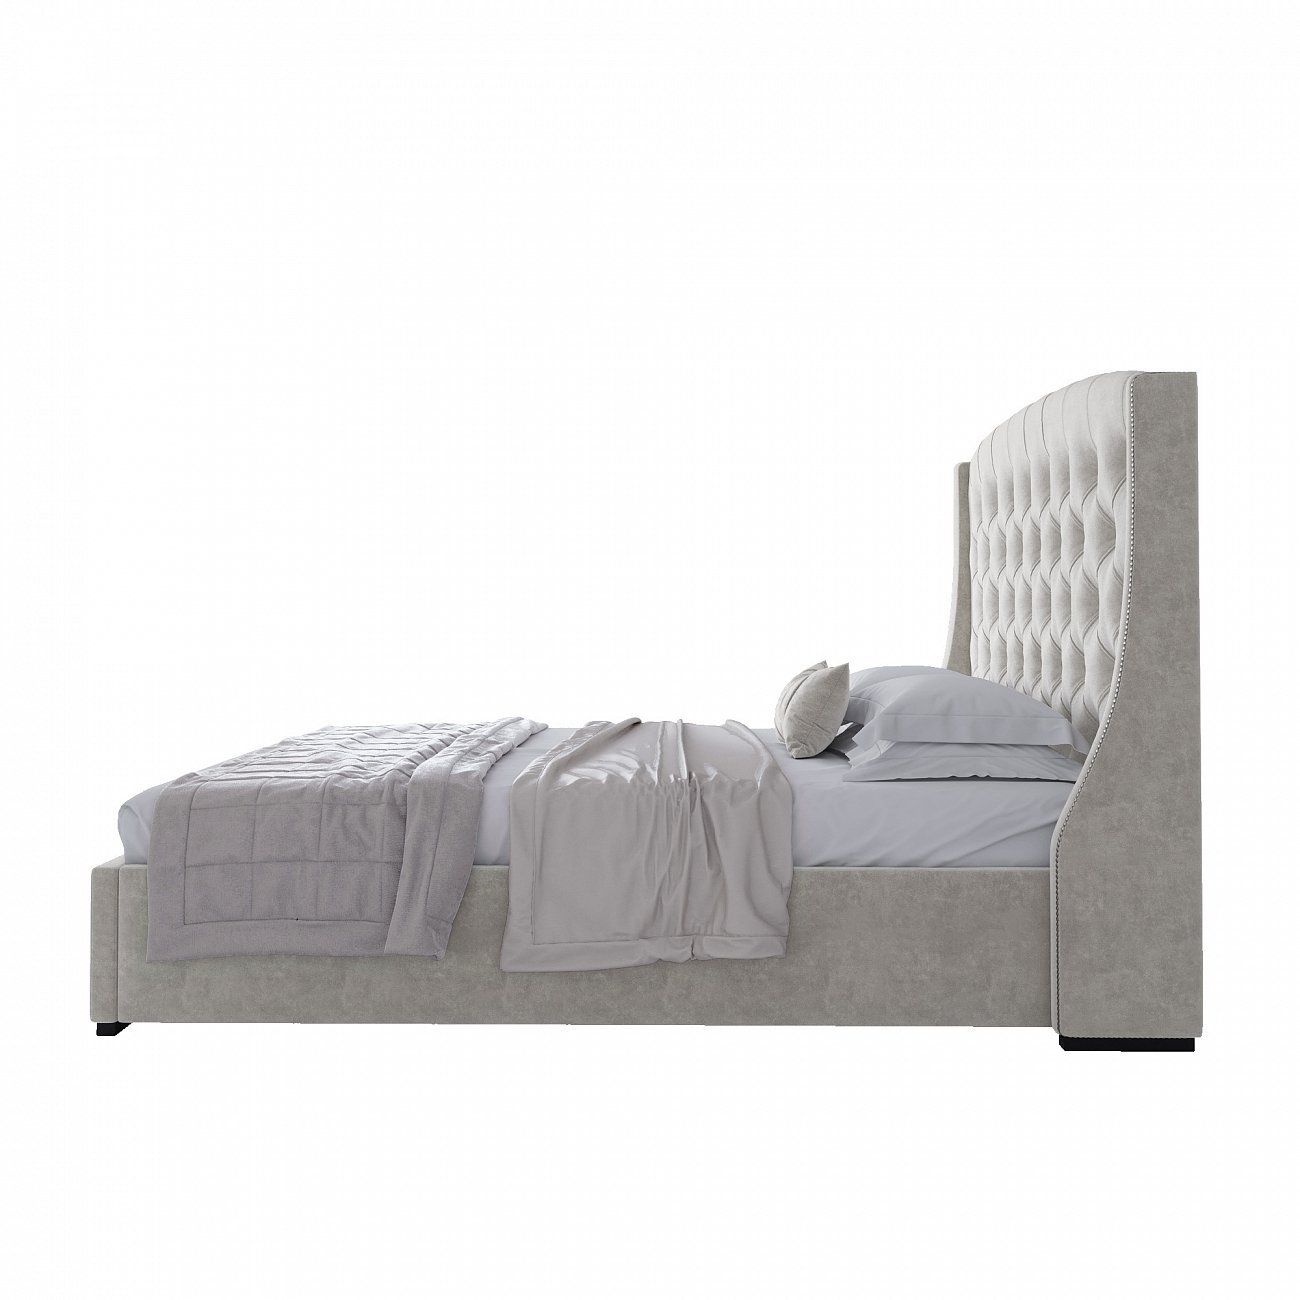 Double bed with upholstered headboard 160x200 cm light beige Hugo